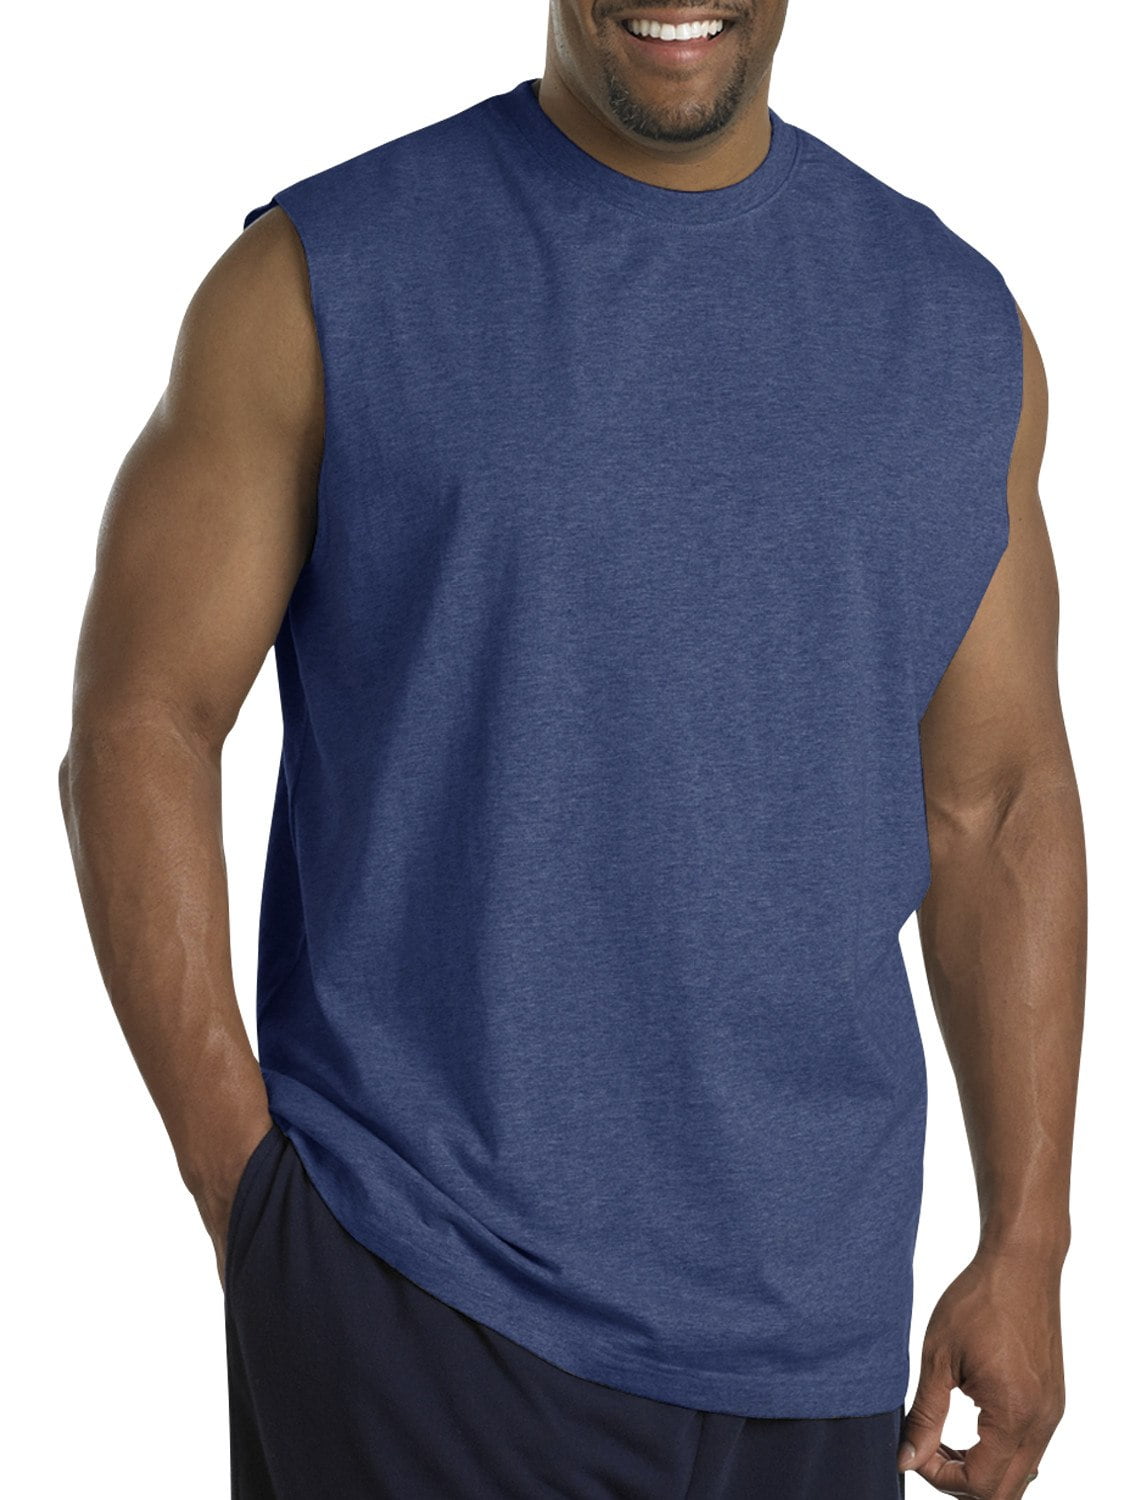 Harbor Bay by DXL Big and Tall Men's Moisture-Wicking Muscle T-Shirt ...